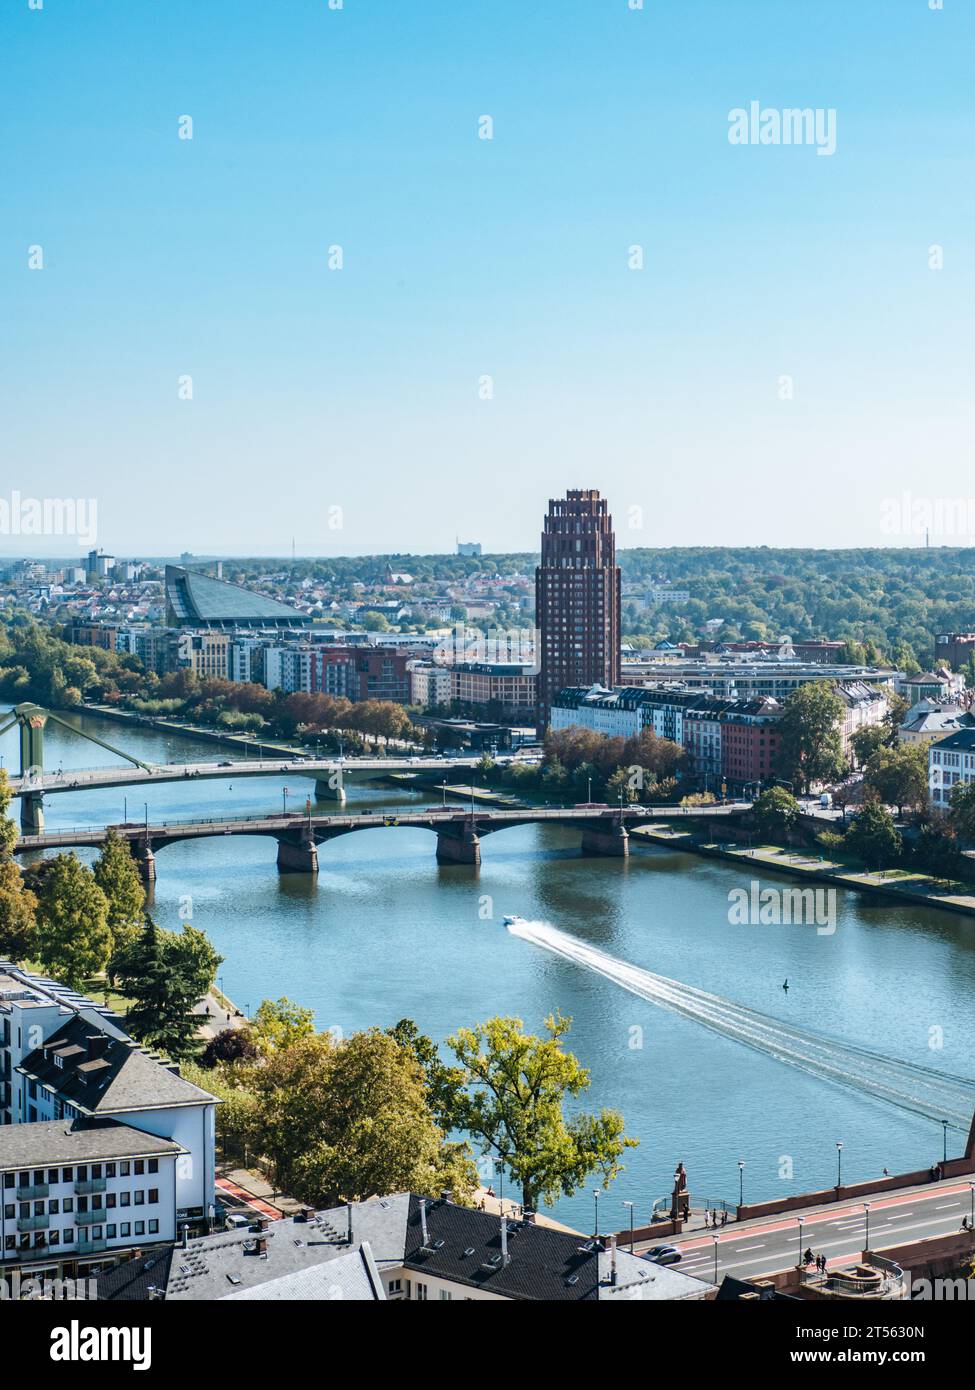 Panorama of the skyline of Frankfurt am Main city with several Bridges over Main River, Germany Stock Photo